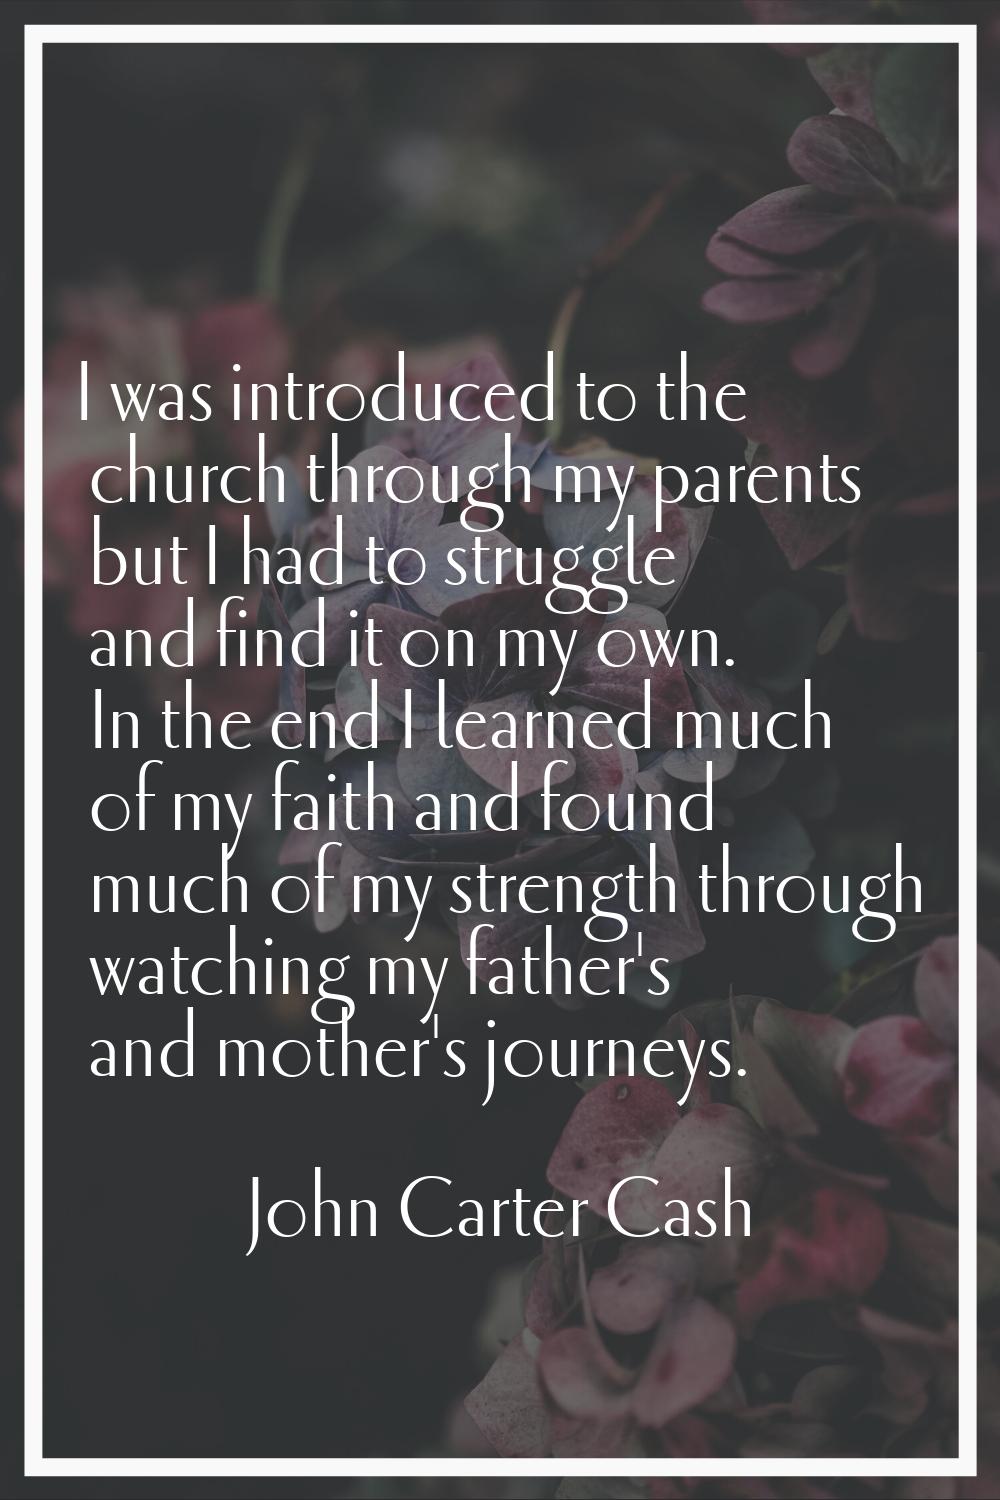 I was introduced to the church through my parents but I had to struggle and find it on my own. In t